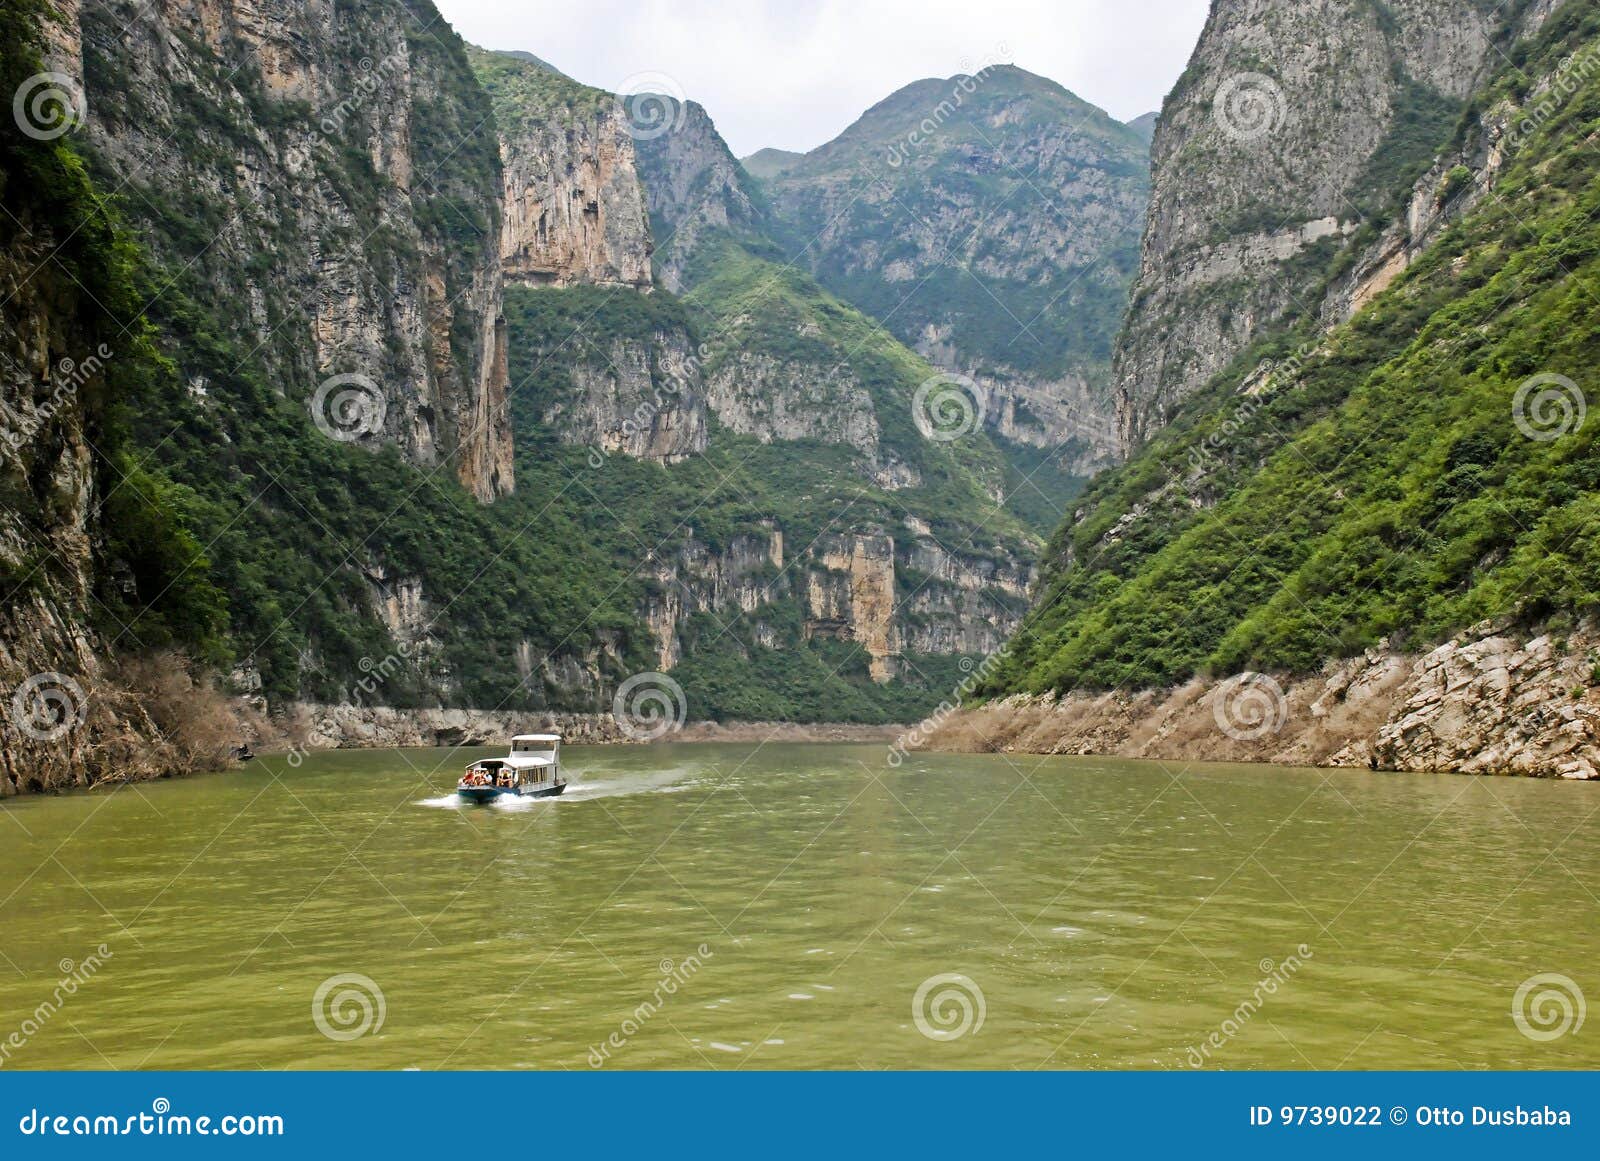 excursion boat in central china